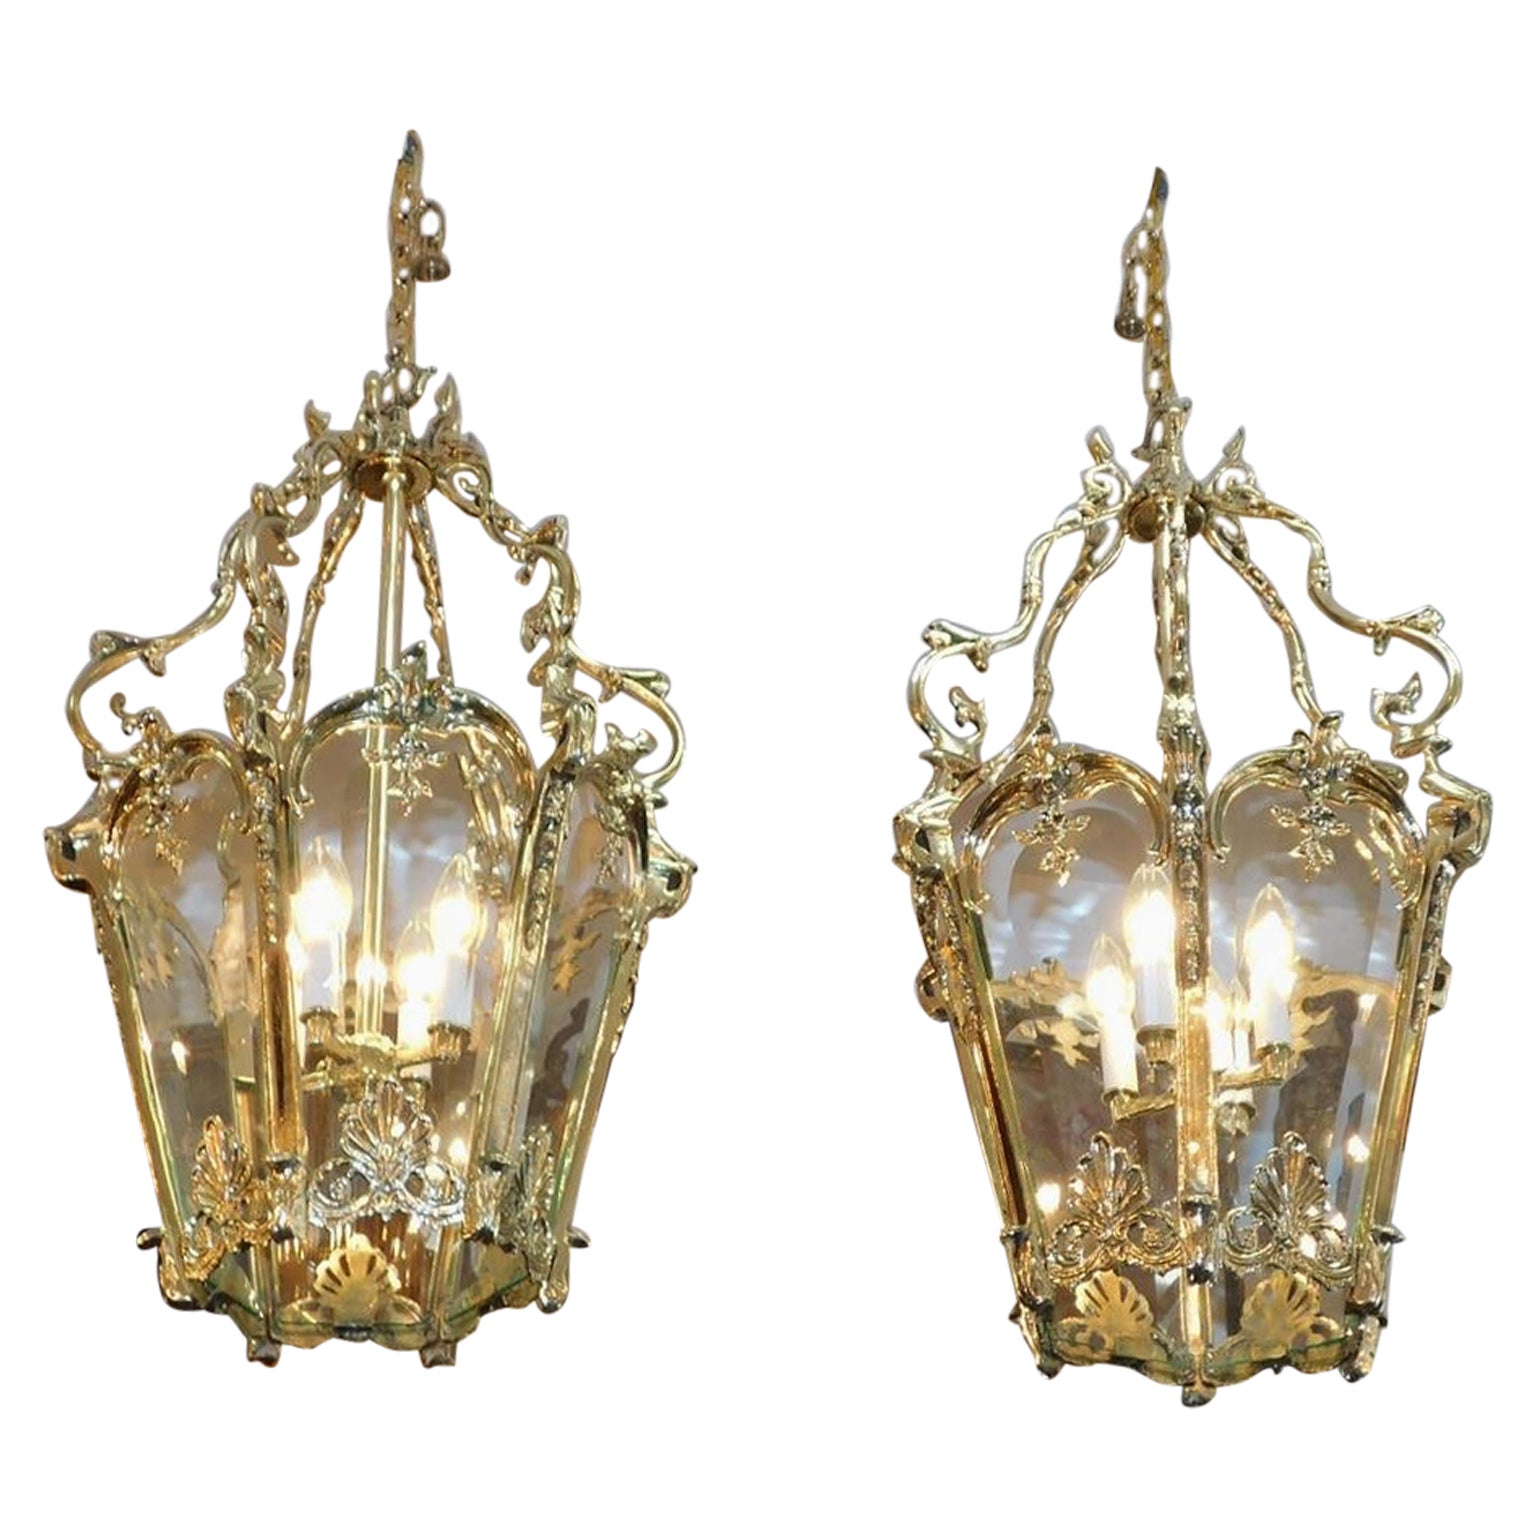 Pair of French Brass Foliage Shell & Beveled Glass Hanging Hall Lanterns, C 1820 For Sale